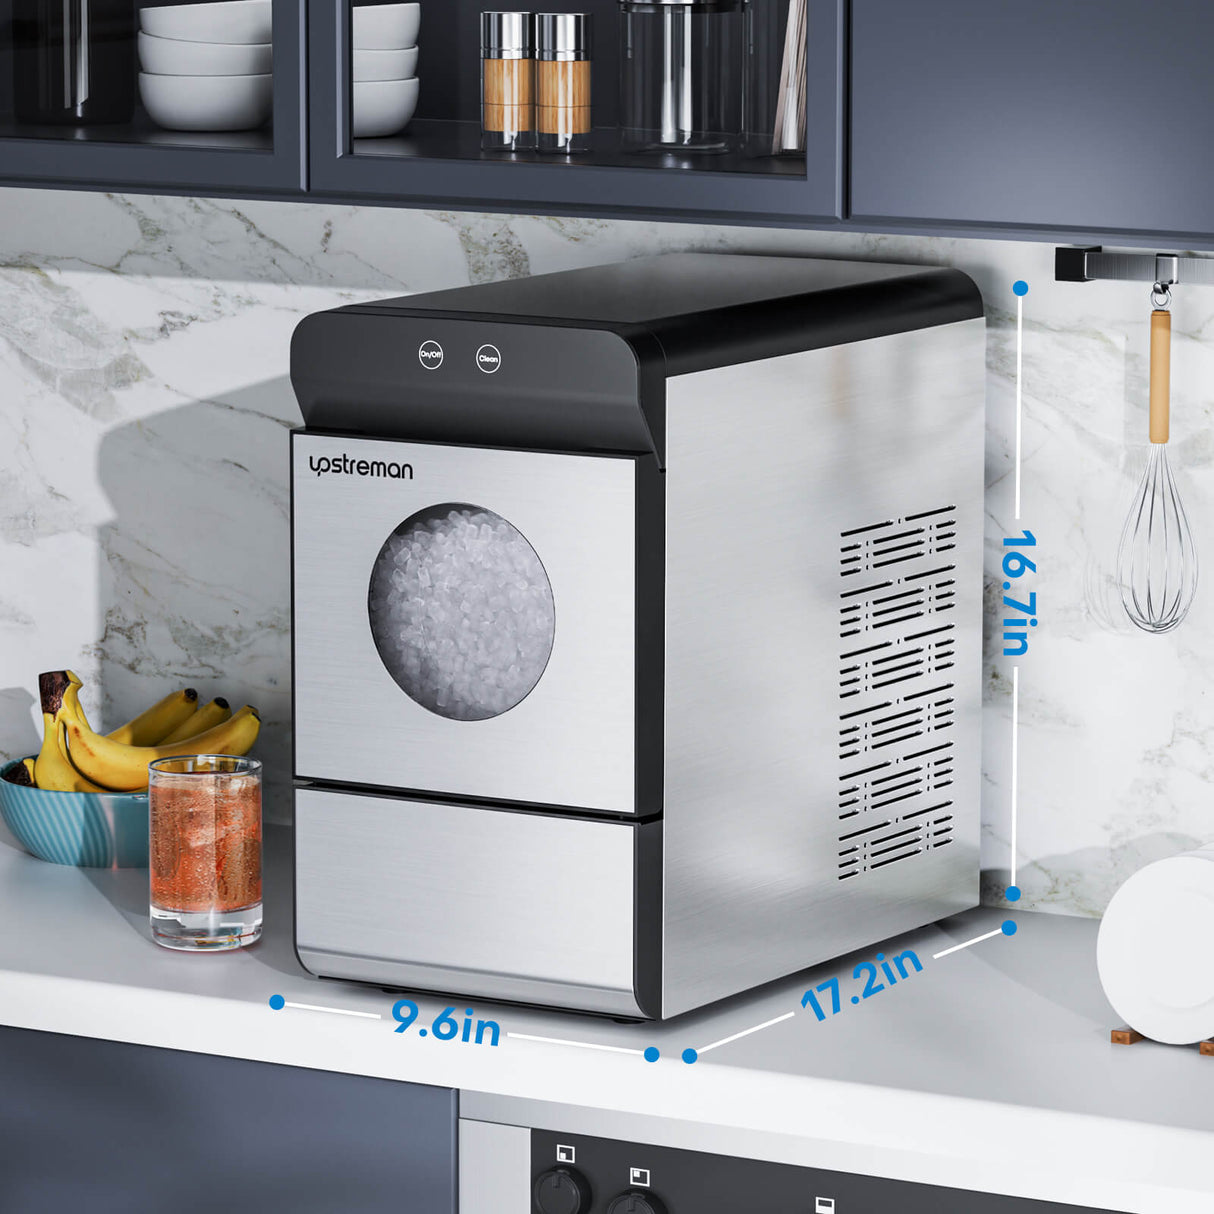 How to Connect an Ice Maker Like a Pro